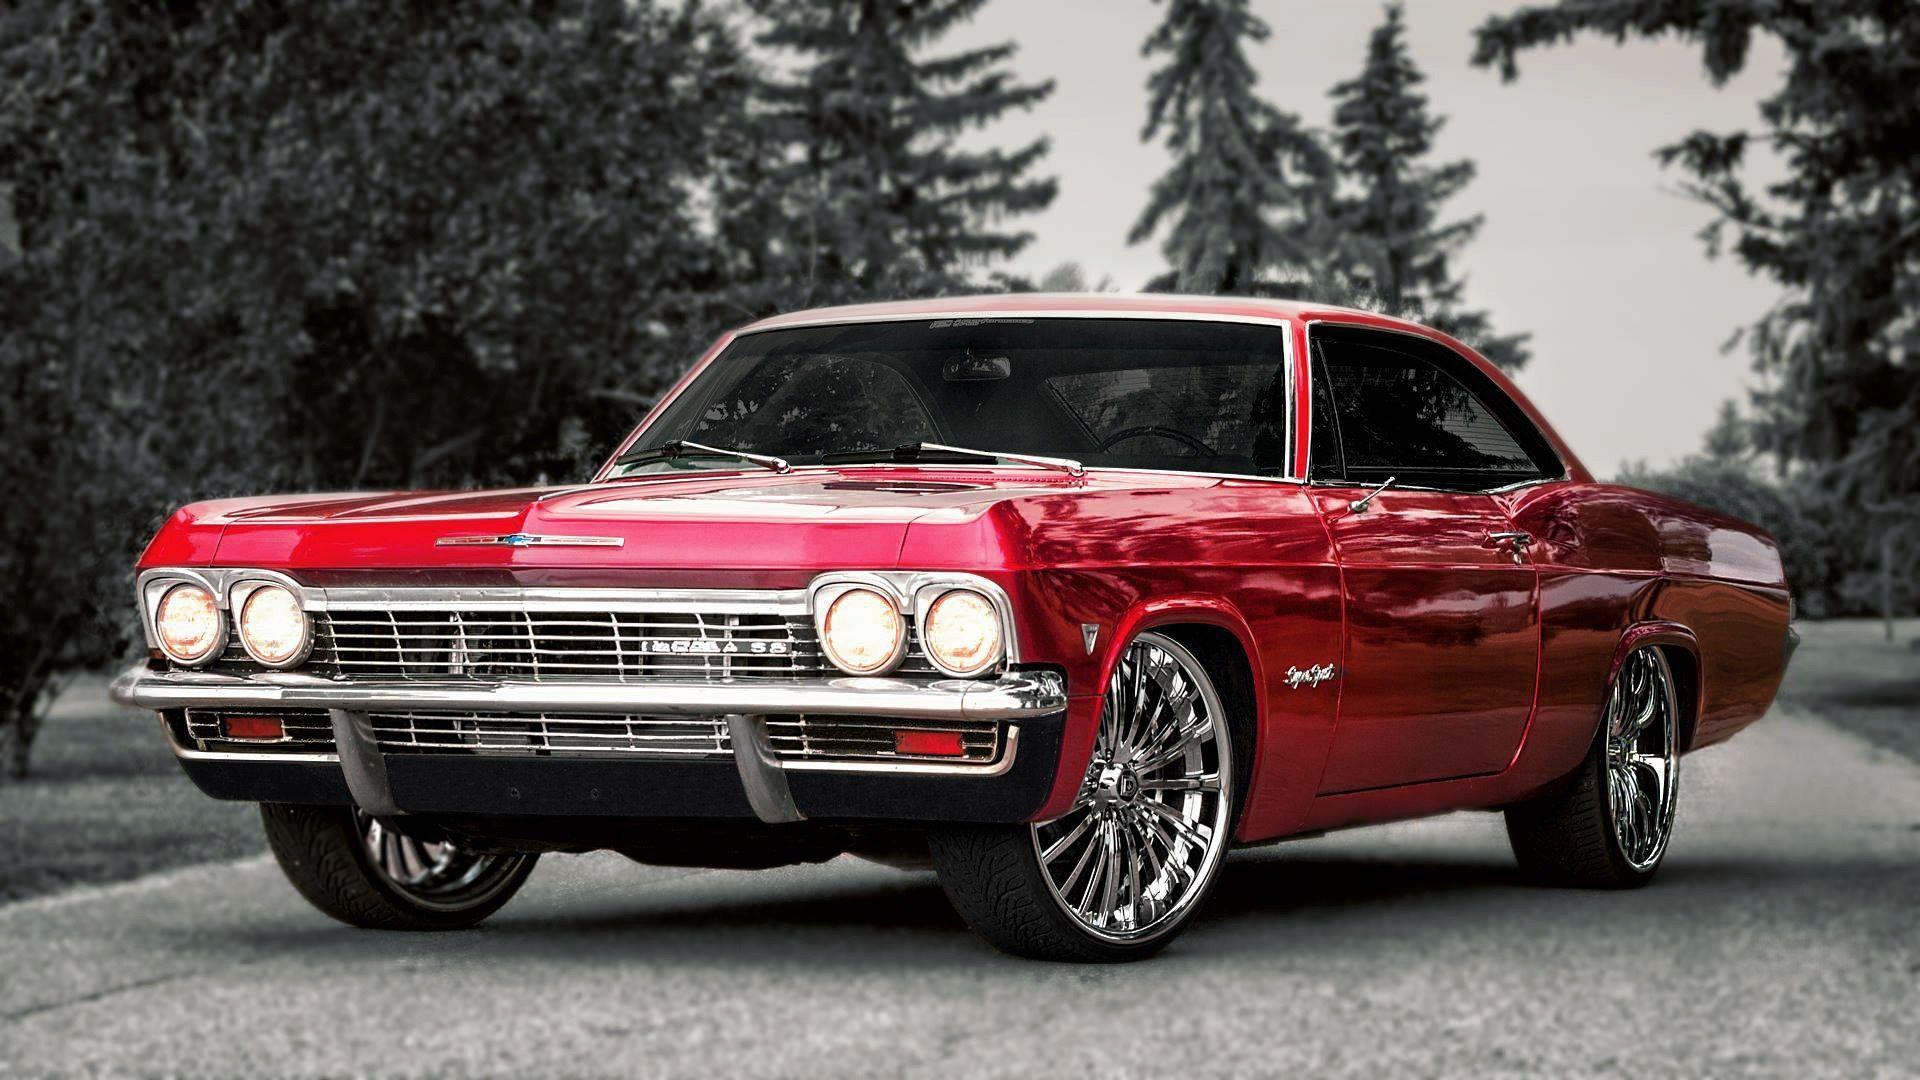 The classical model of Chevrolet Impala SS wallpaper and image